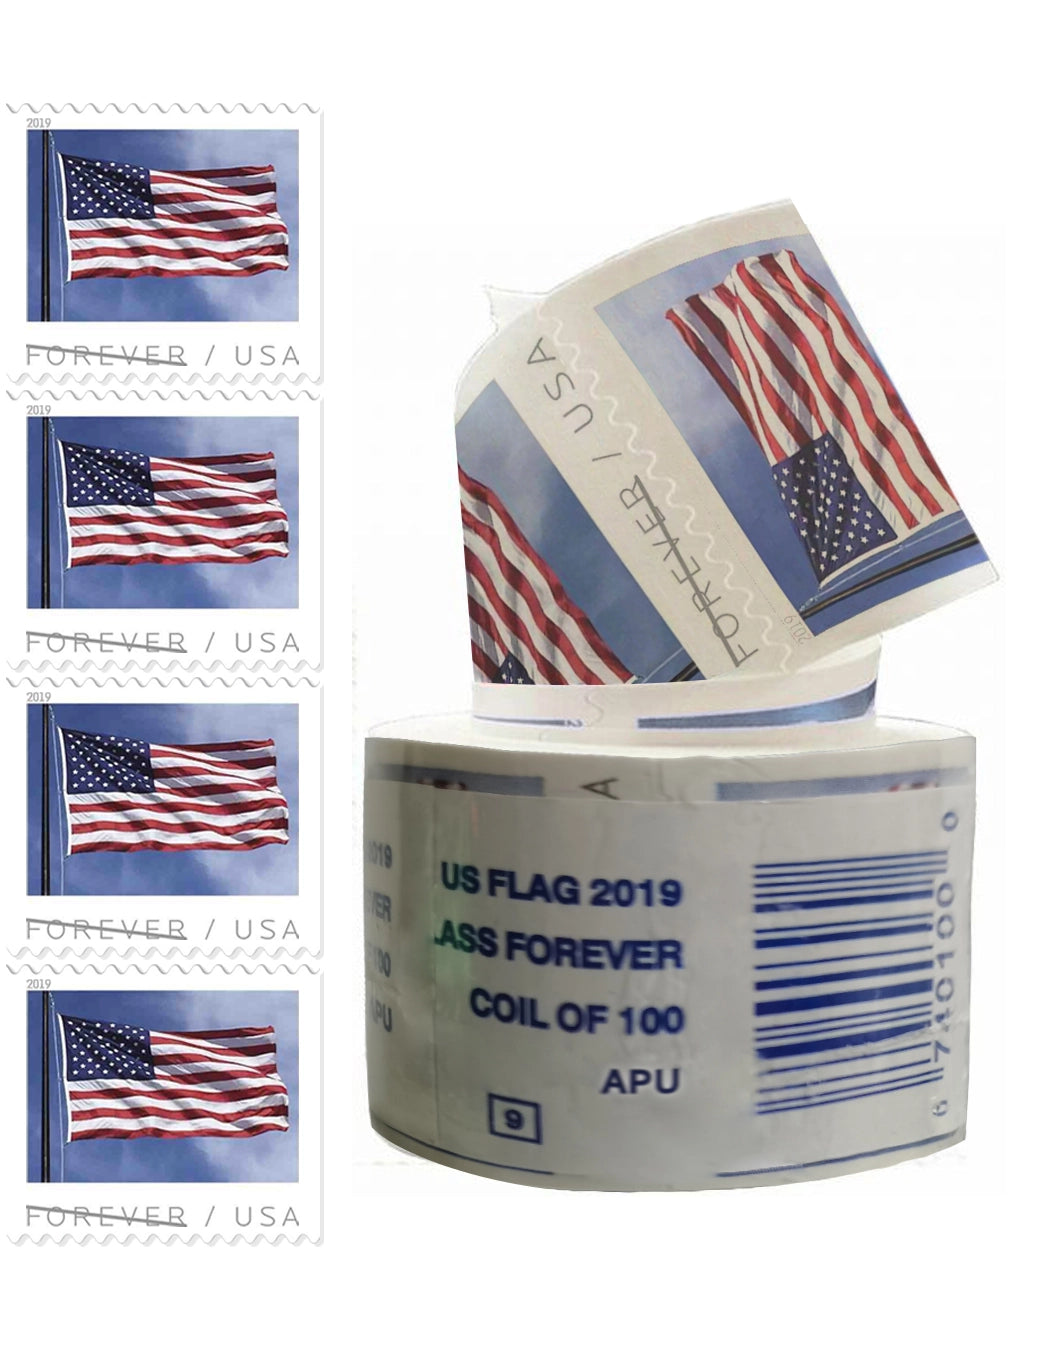 100 Forever Stamps 2019 US Flag USPS First Class Postage Stamps Coil of 100